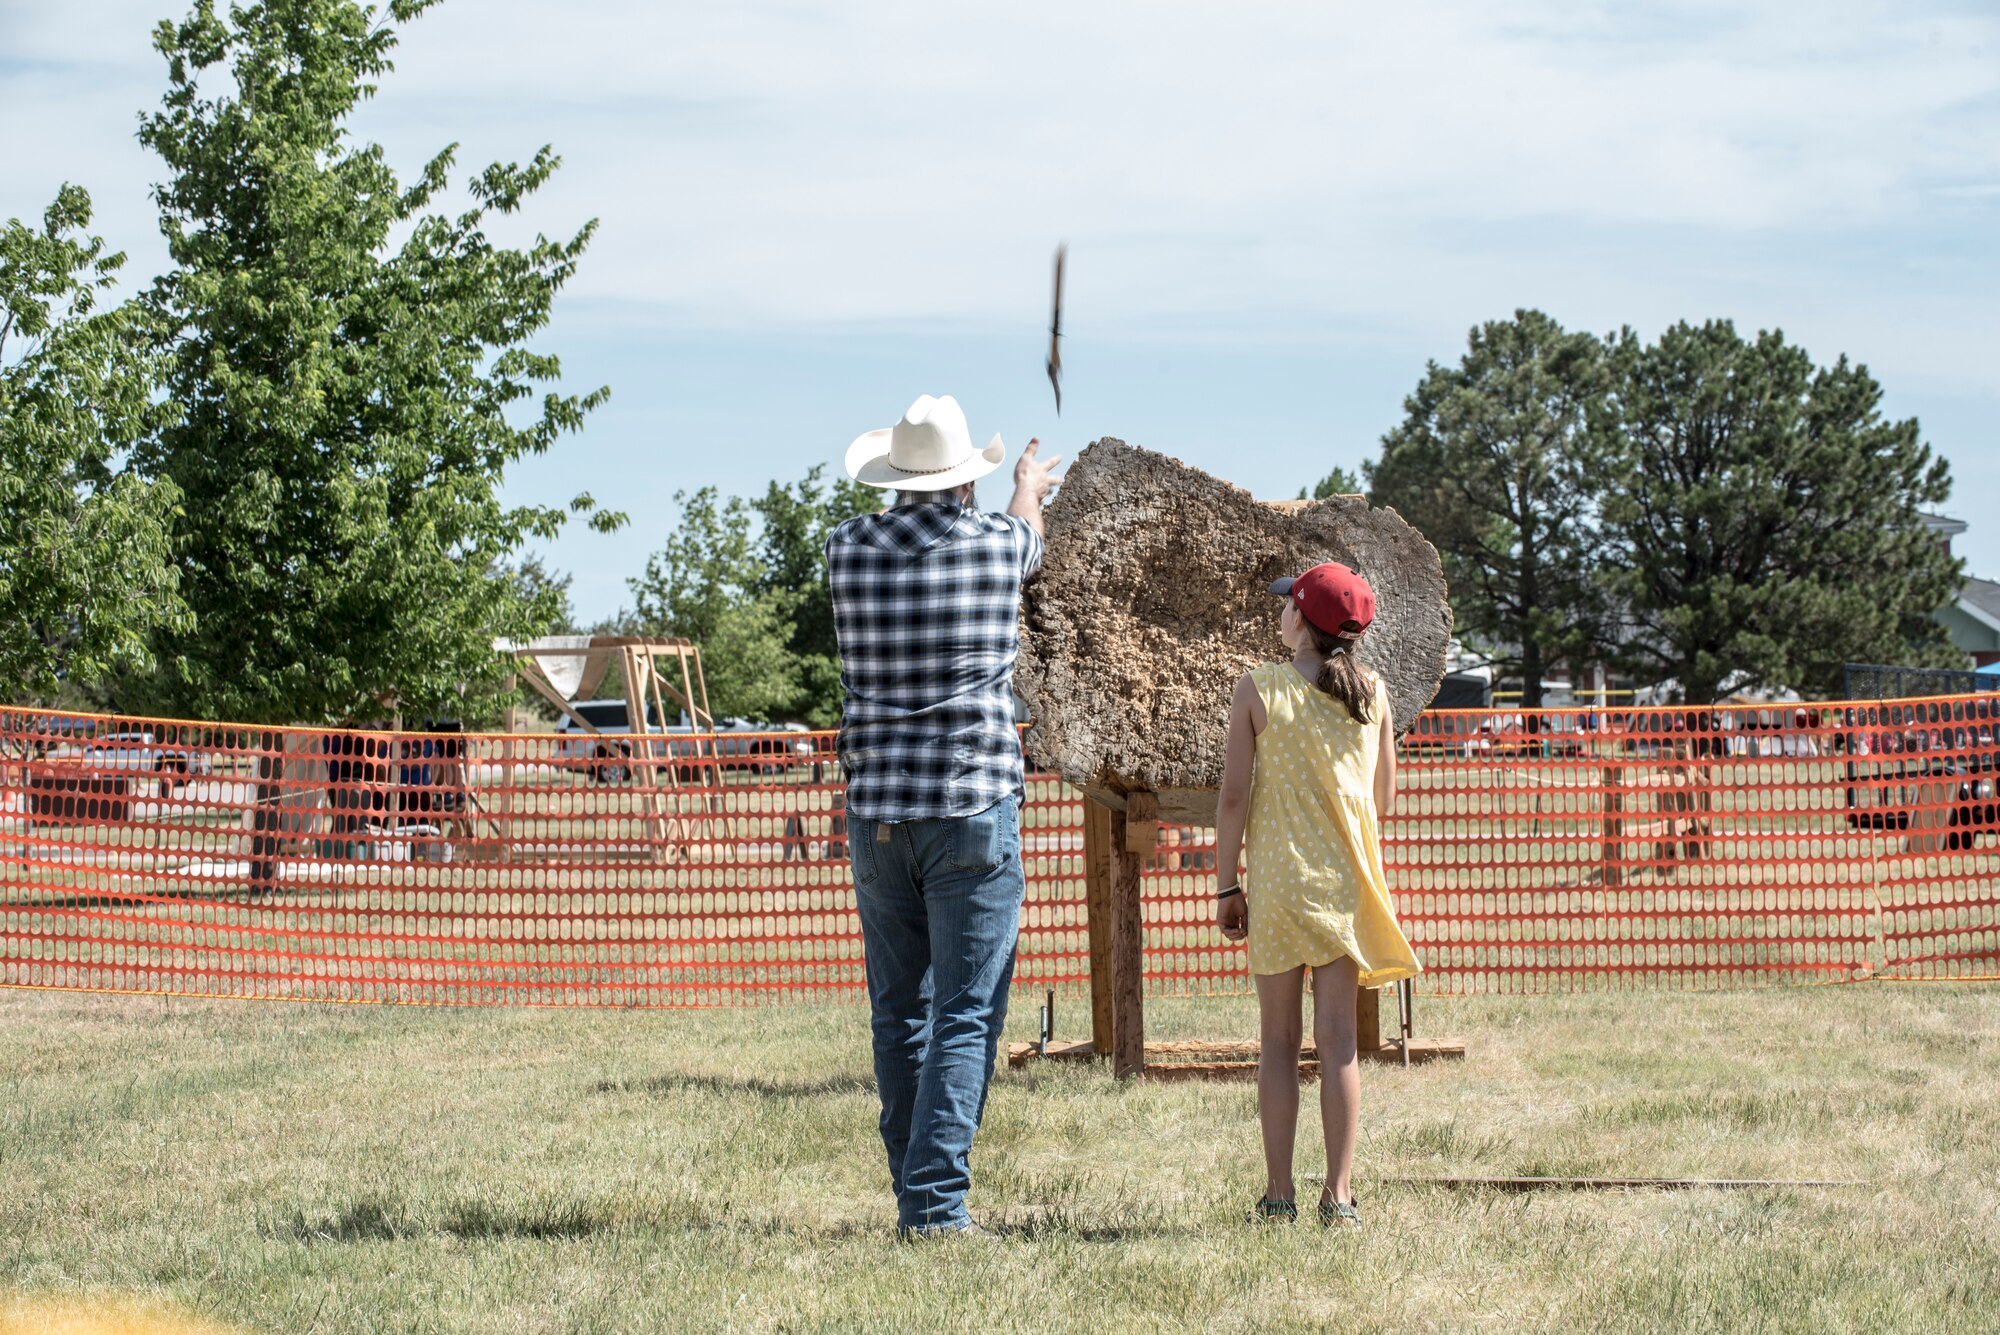 An ax thrower demonstrates proper technique to a visitor during Fort D.A. Russell Days, July 19, 2019, on F.E. Warren Air Force Base, Wyo. The annual open house invites the community and visitors to tour the base to learn about its history and its current ICBM deterrence mission. (U.S. Air Force photo by Senior Airman Abbigayle Williams)